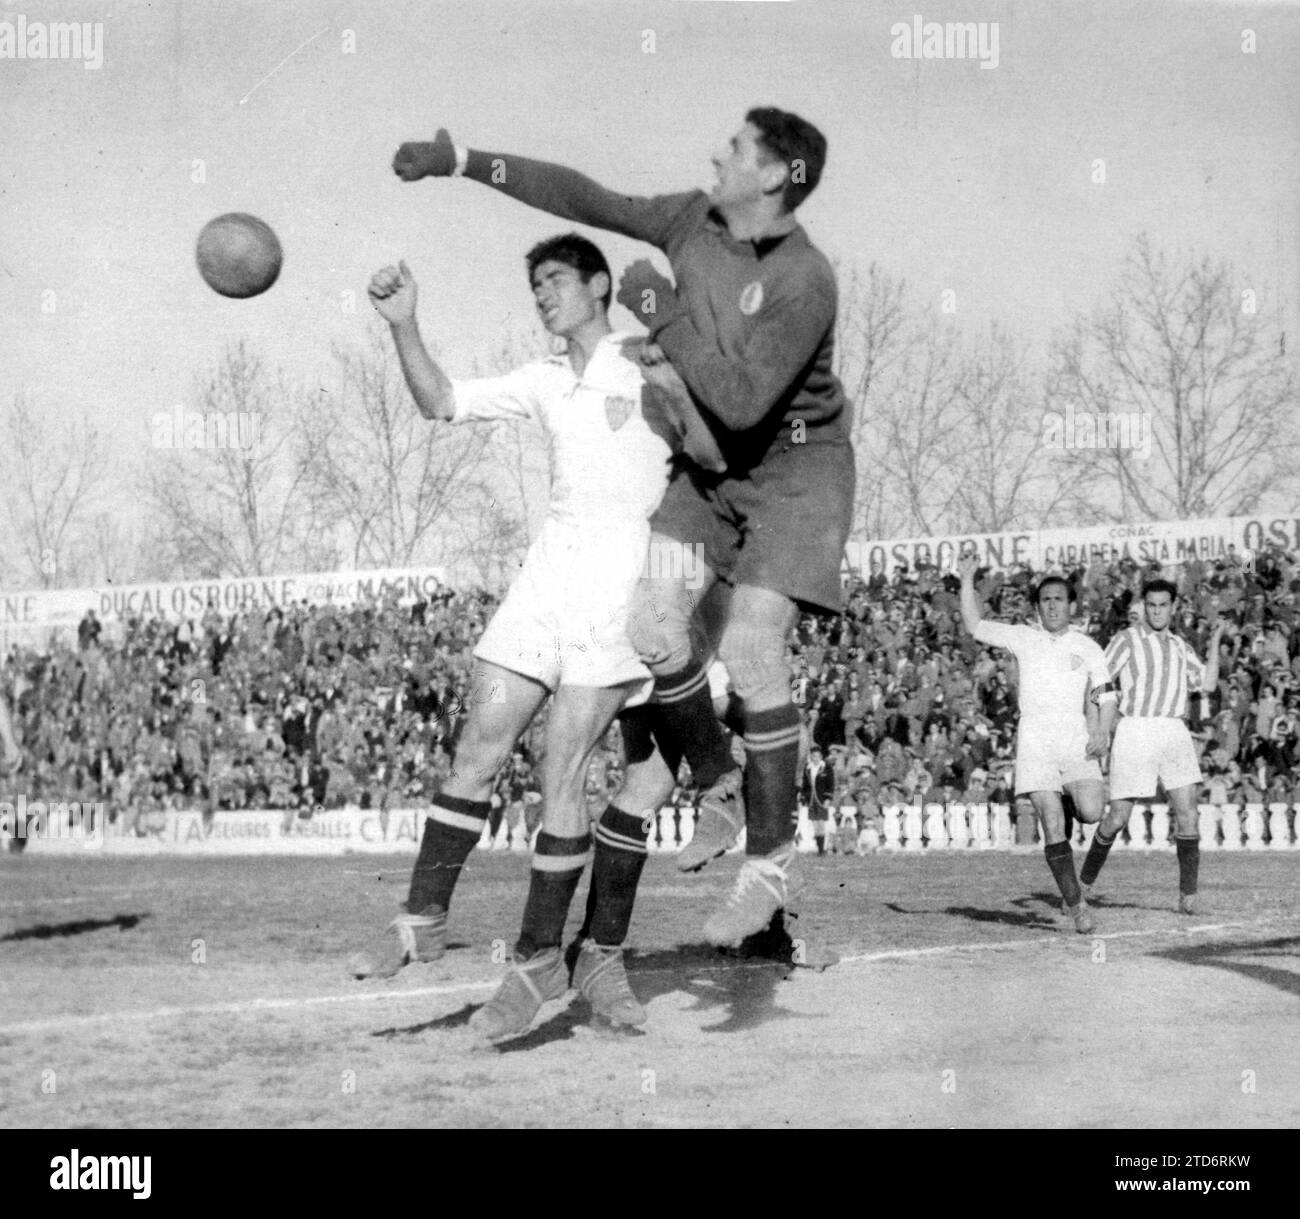 Real's goalkeeper punches the ball harassed by Herrera add documentation photo Id 8531198. - Sevilla-real Sociedad match valid for the first division league of the 1943-44 season, played at the Nervión field on February 20, 1944 , with Sevillista victory 4-0 with goals from Herrera, Rincón, Iturbe and Campos. In the Image, Real's goalkeeper, Galarraga, Clears His Fists in the face of harassment from Herrera, scorer of the first Sevilla goal. (photo Serrano). Credit: Album / Archivo ABC / Serrano Stock Photo